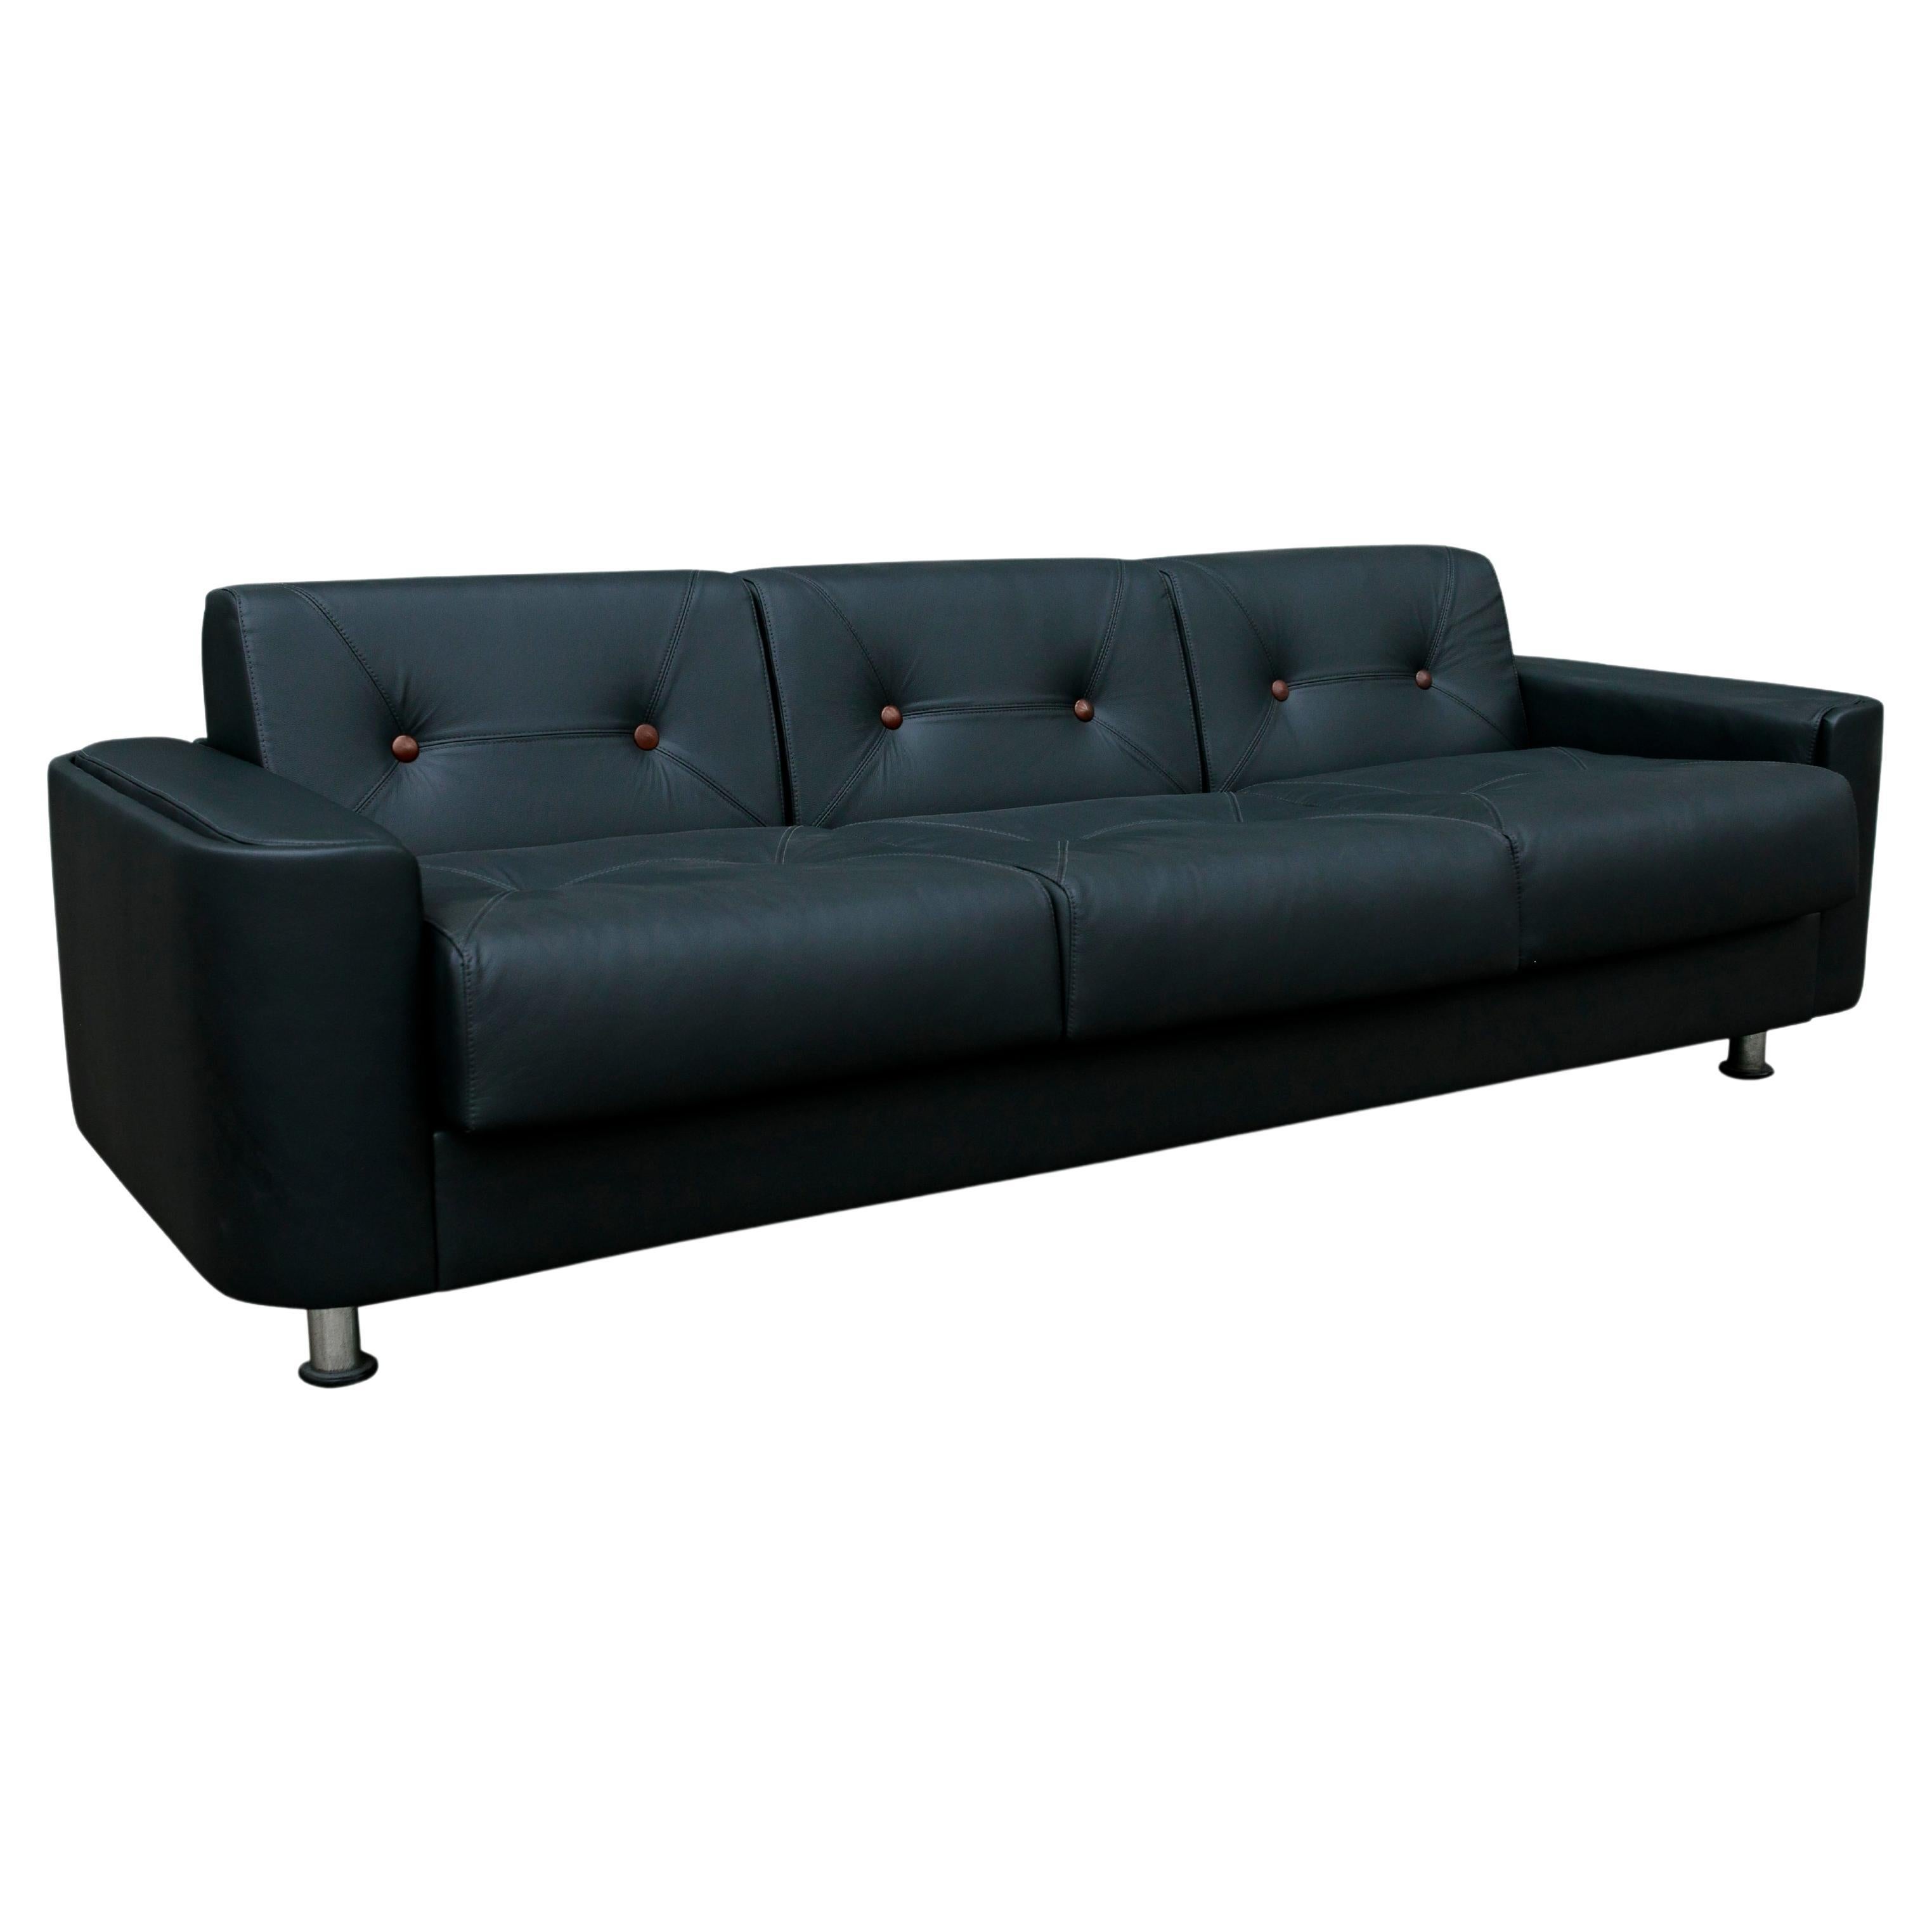 Mid-Century Modern Sofa in Black Leather & Wood by Jorge Zalszupin, Brazil, 1970 For Sale